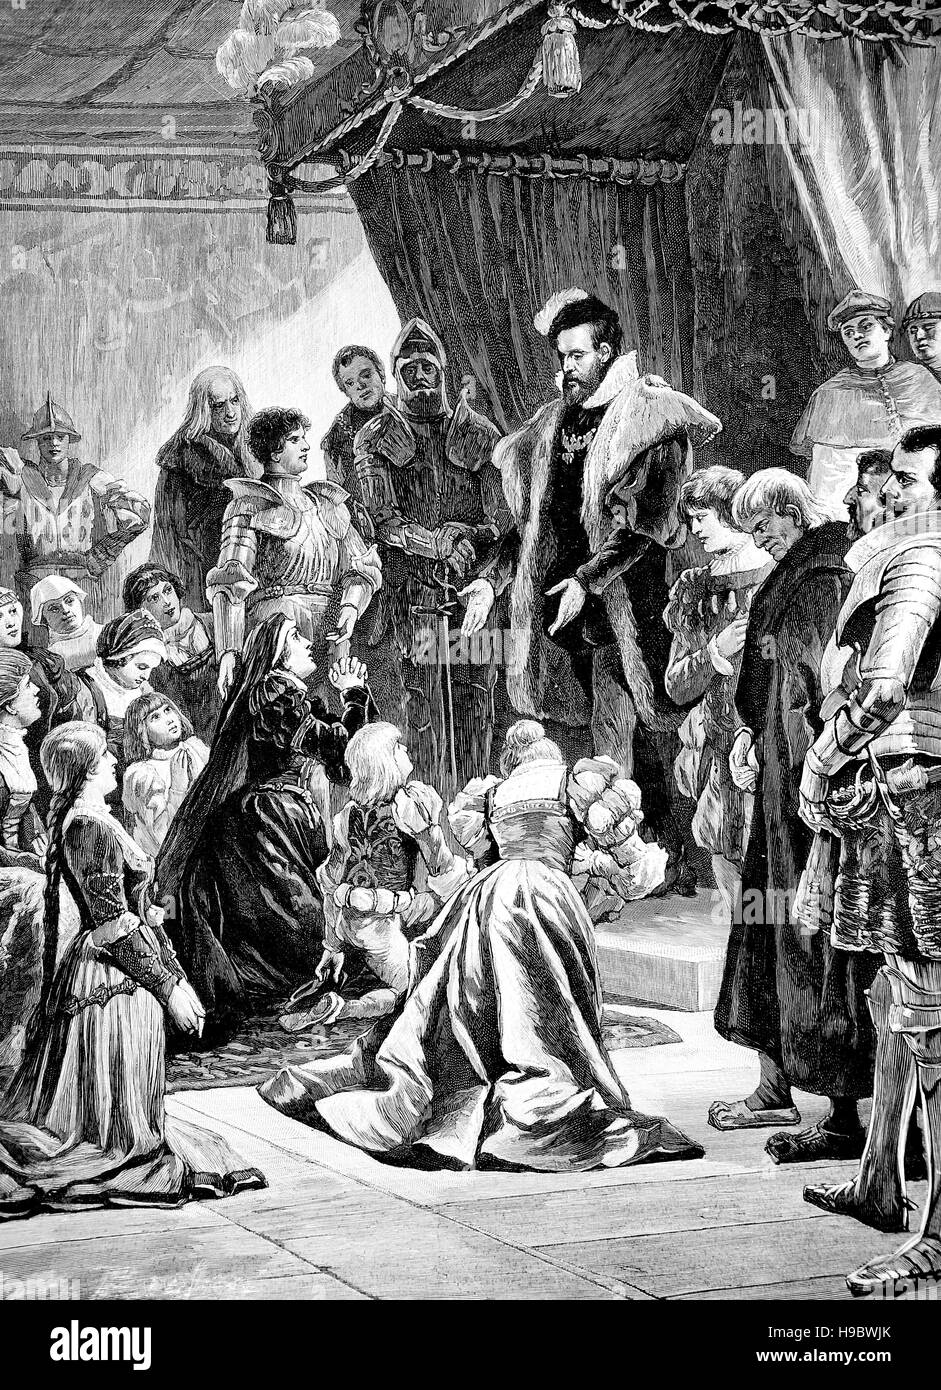 John Frederick II of Saxony, 8 January 1529 - 19 May 1595, as a child infront of Charles V, Holy Roman Emperor, historical illustration Stock Photo